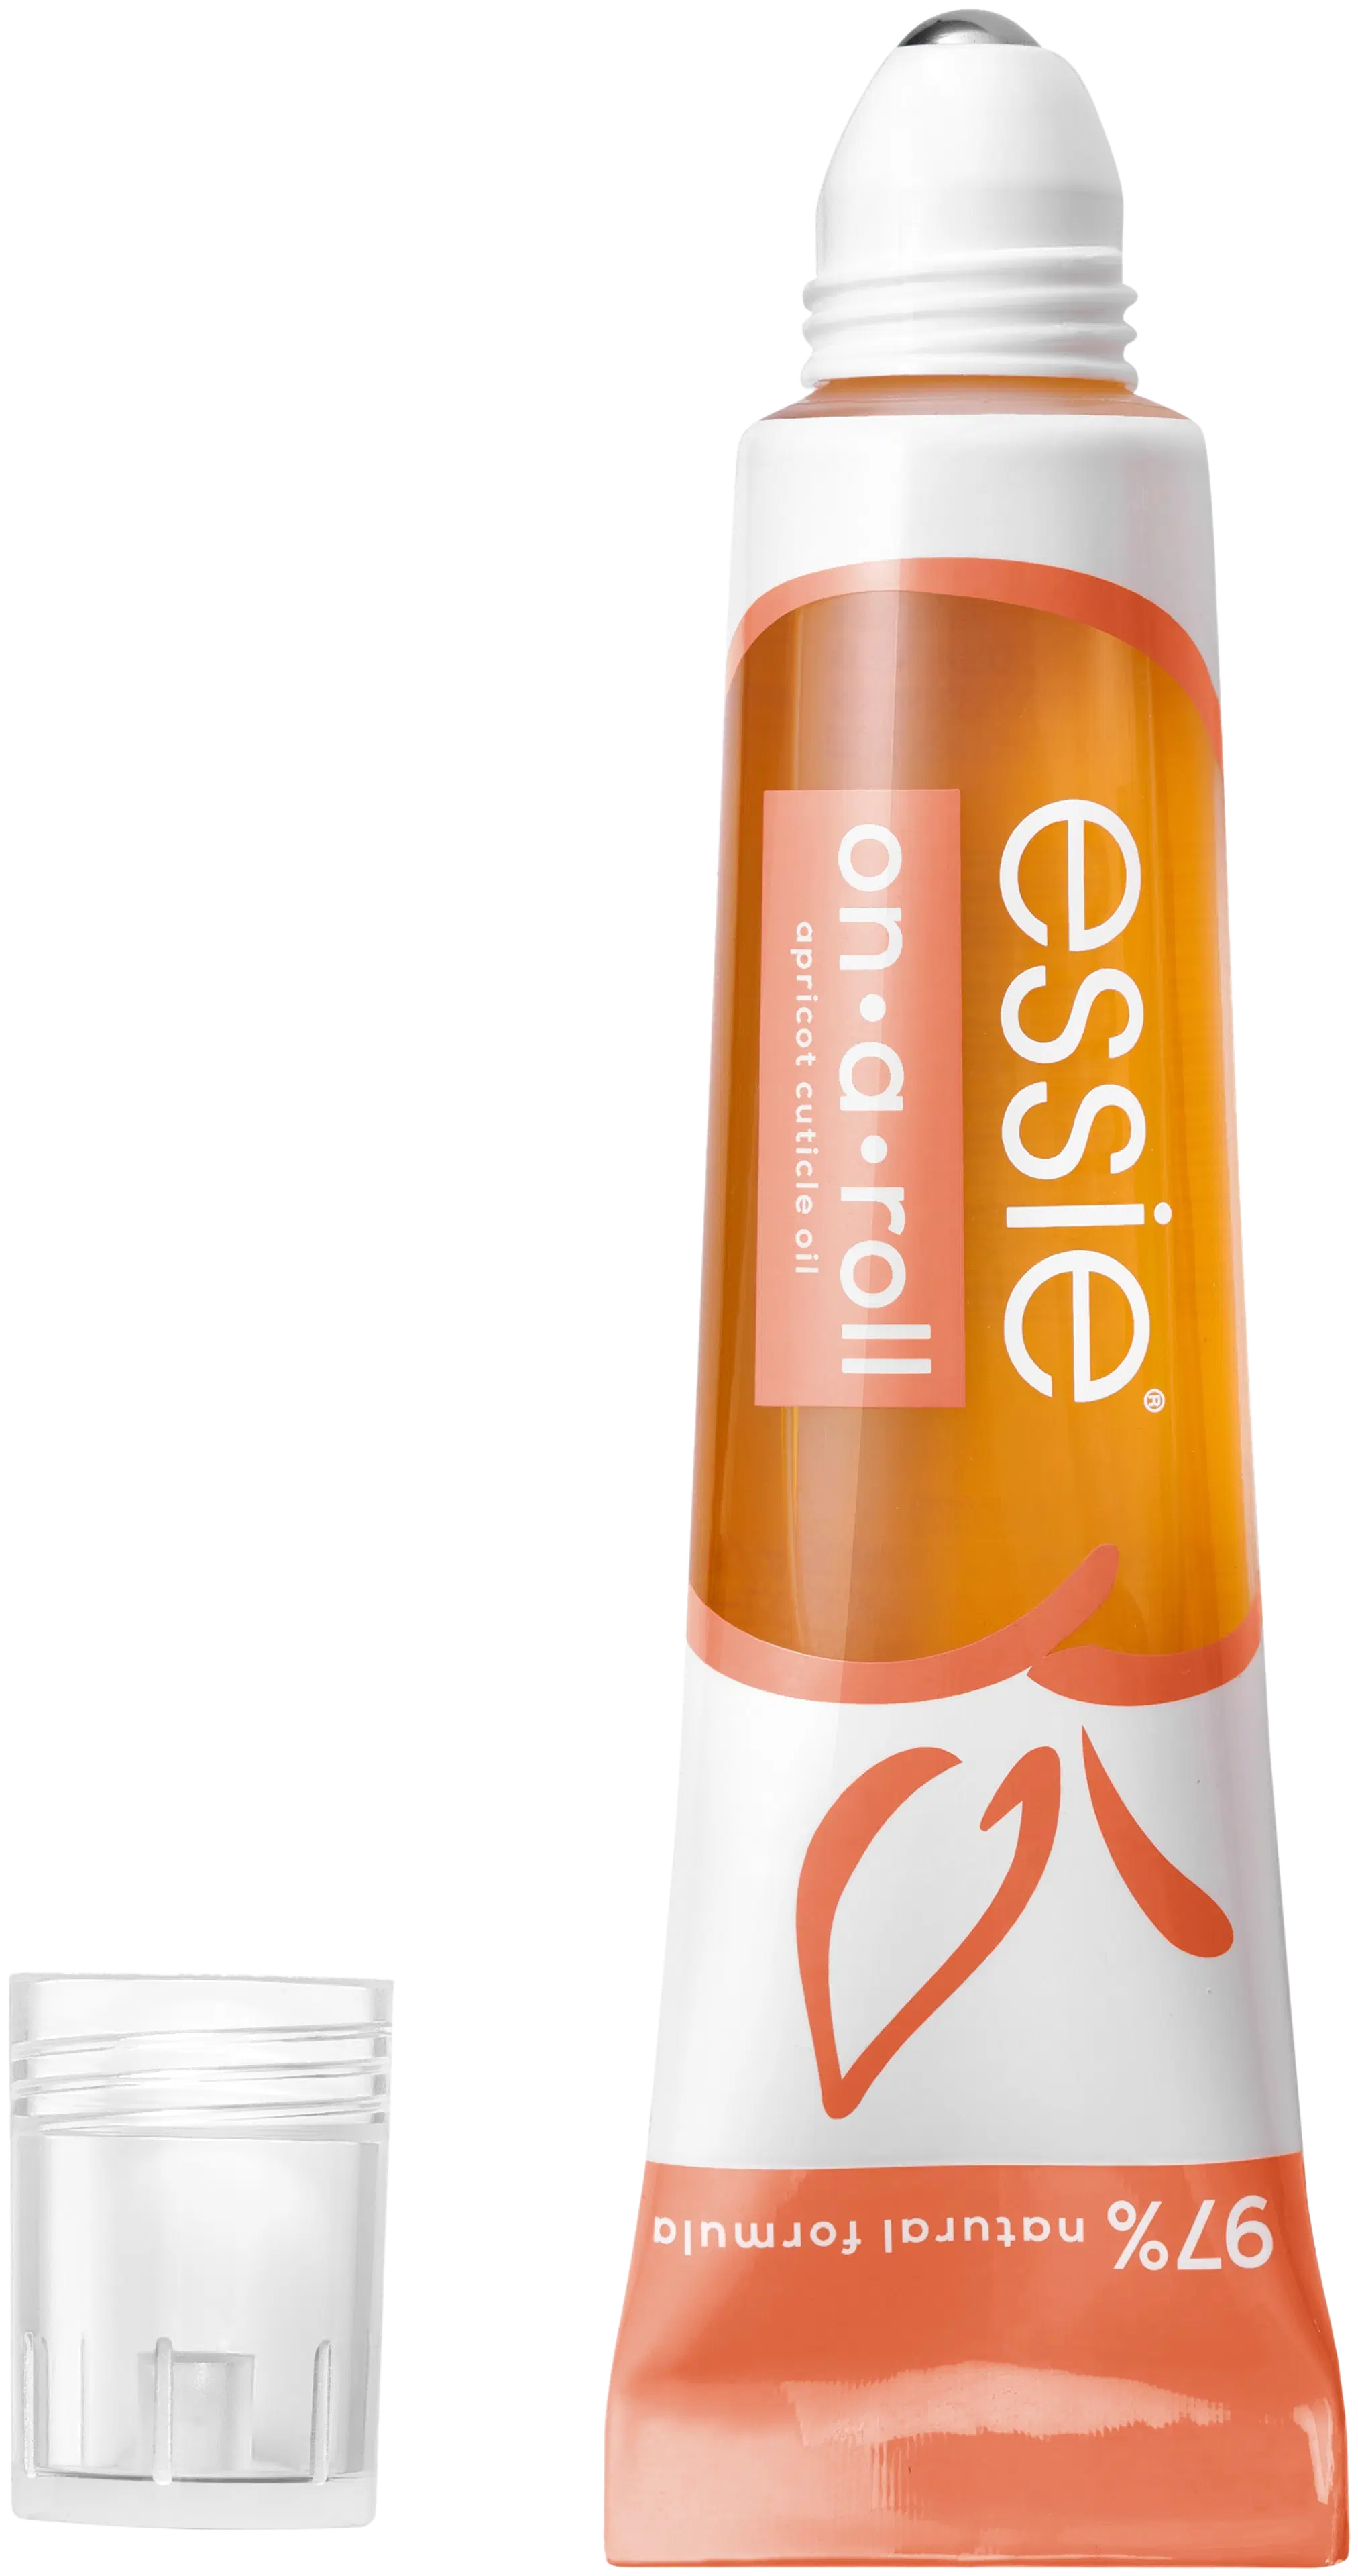 essie on-a-roll apricot nail and cuticle oil kynsinauhaöljy 13,5ml